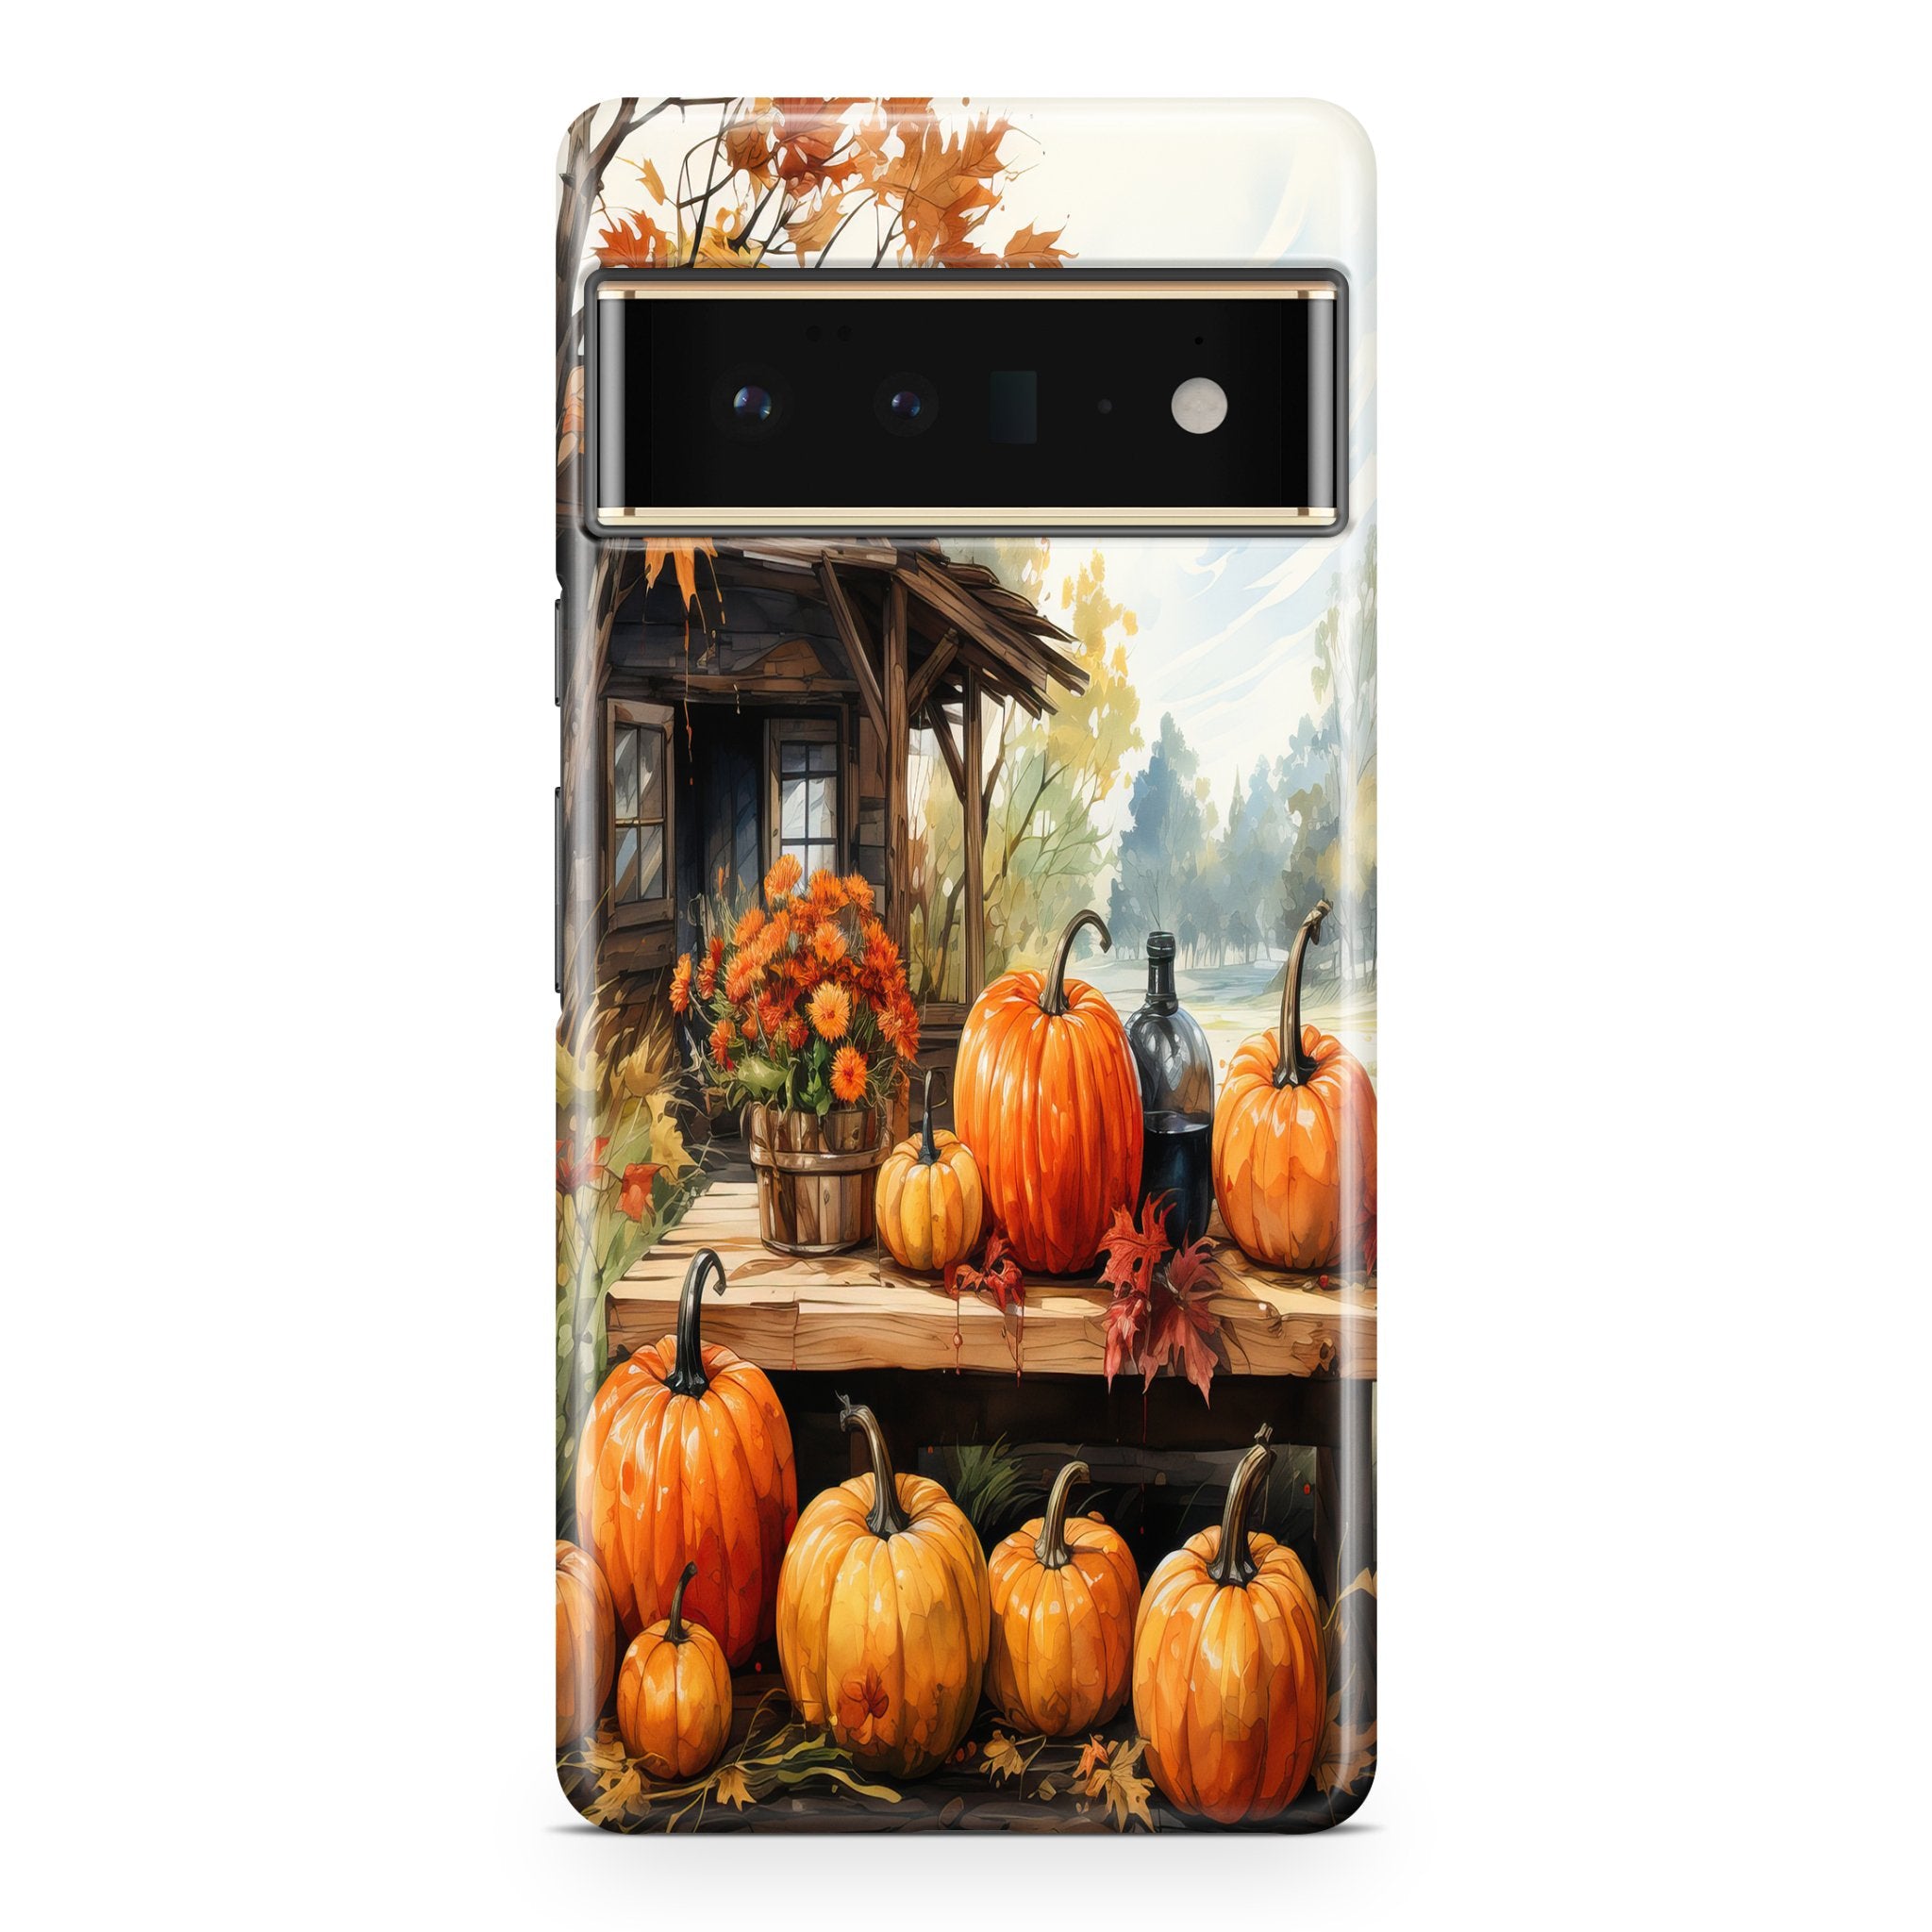 Fall Farm Harvest - Google phone case designs by CaseSwagger